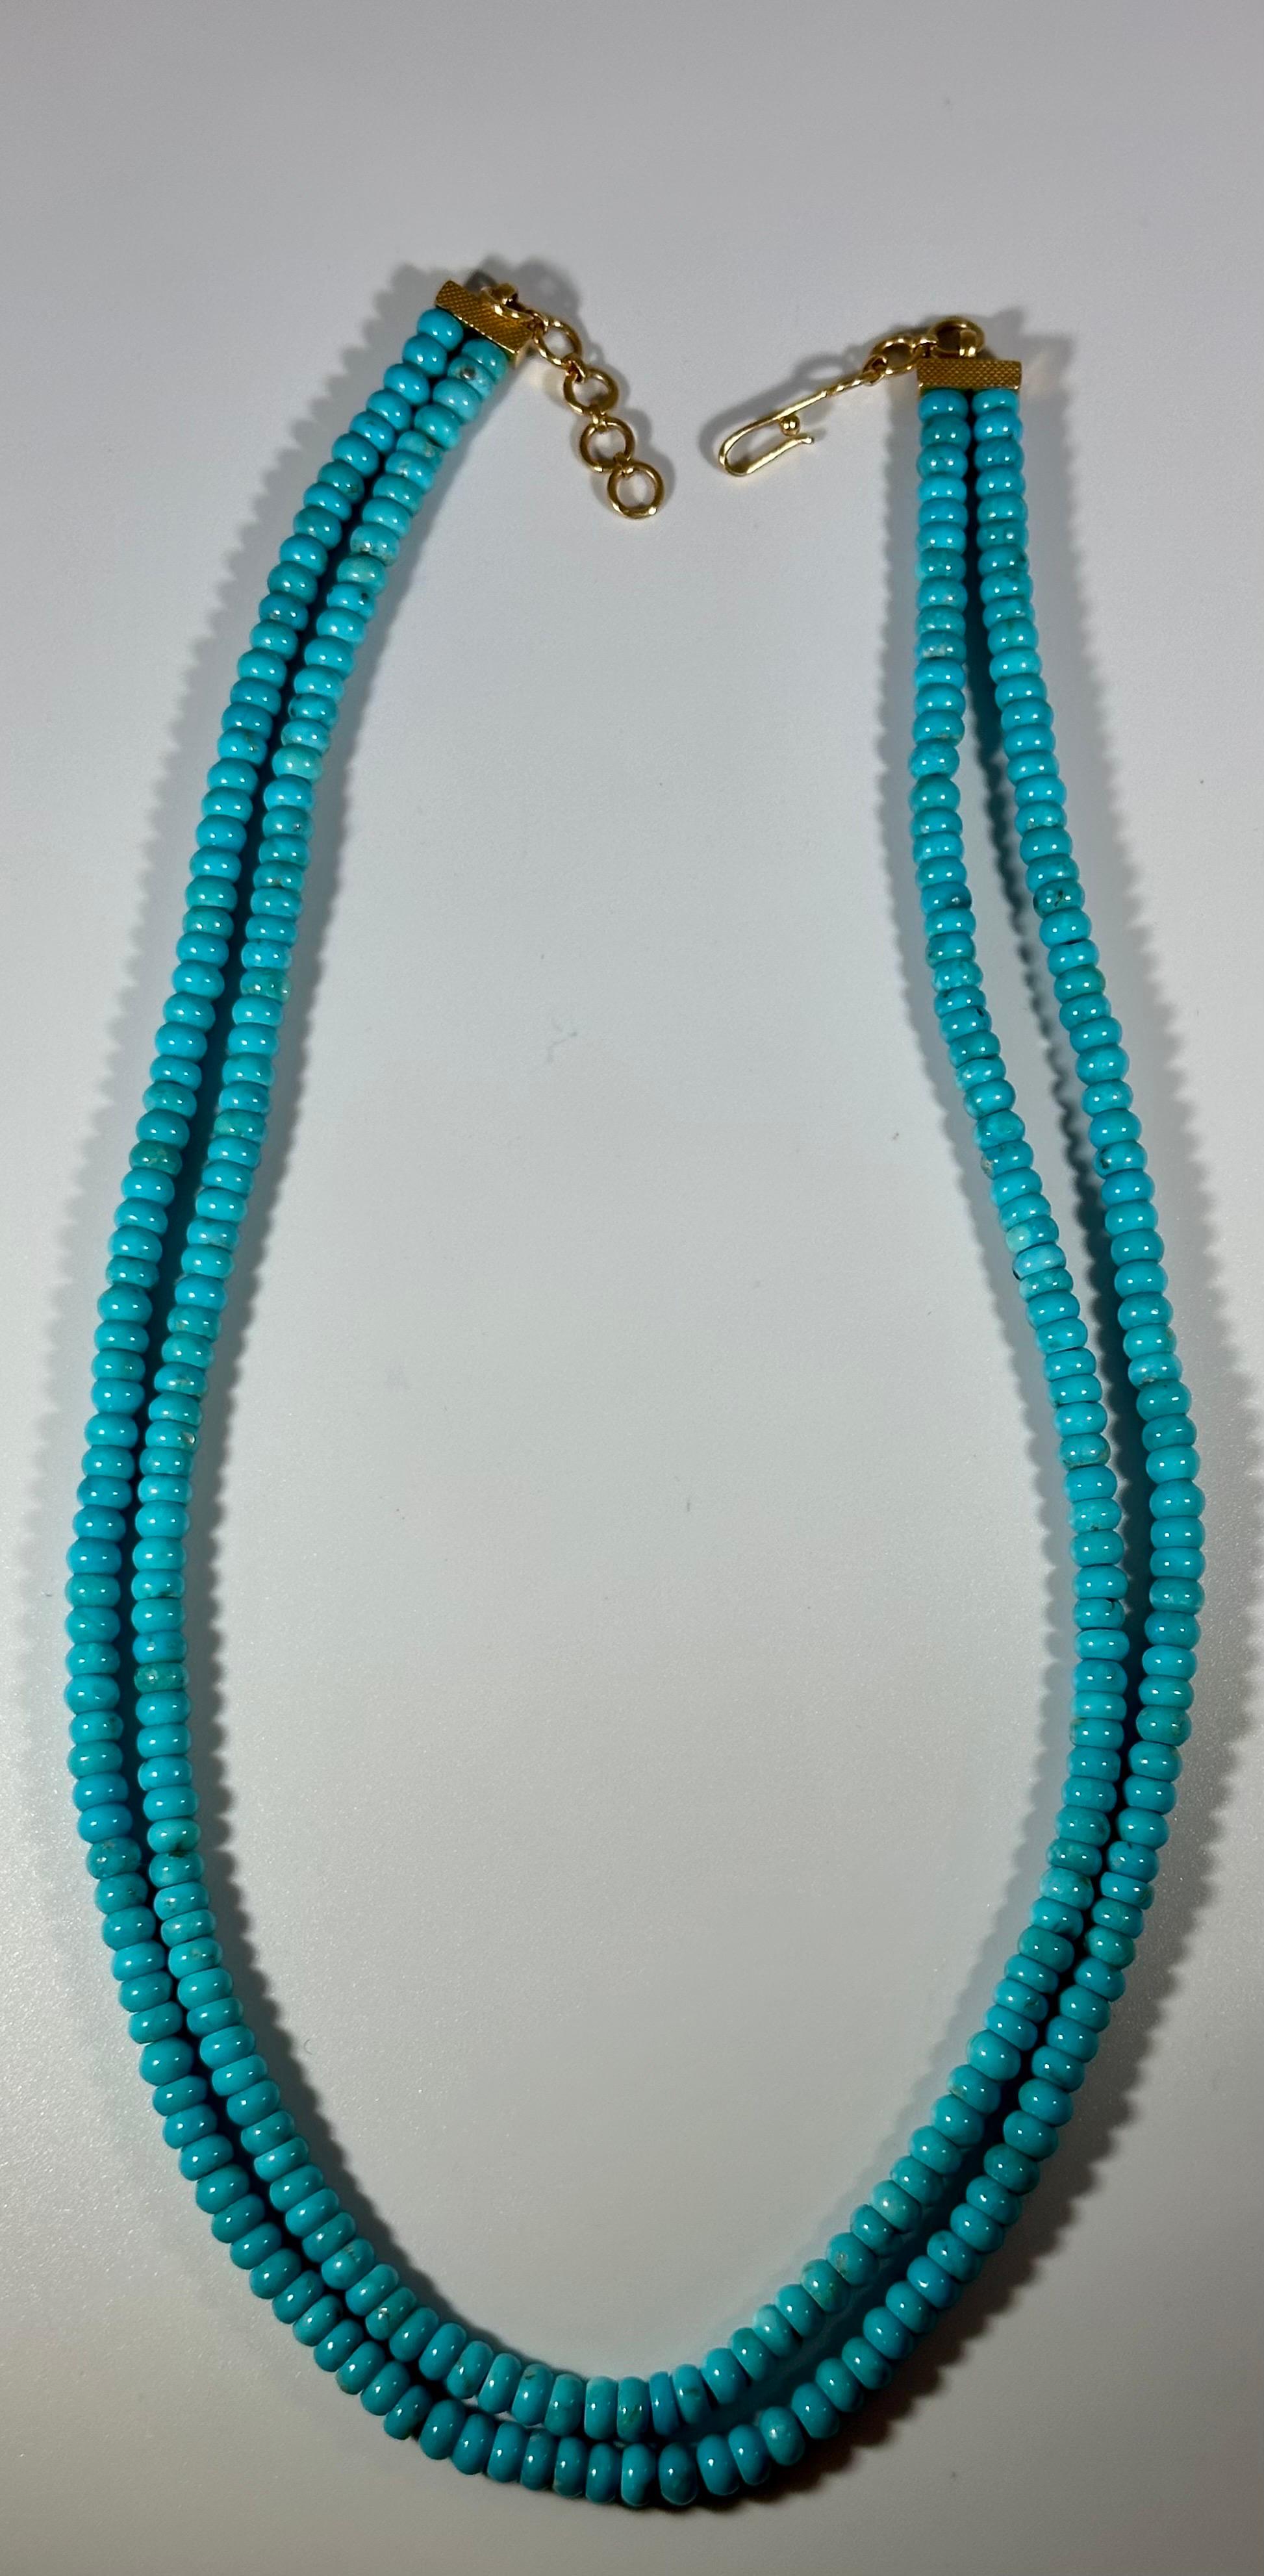 215 Carat Natural Sleeping Beauty Turquoise Necklace, Two Strand 14 Karat Gold For Sale 3